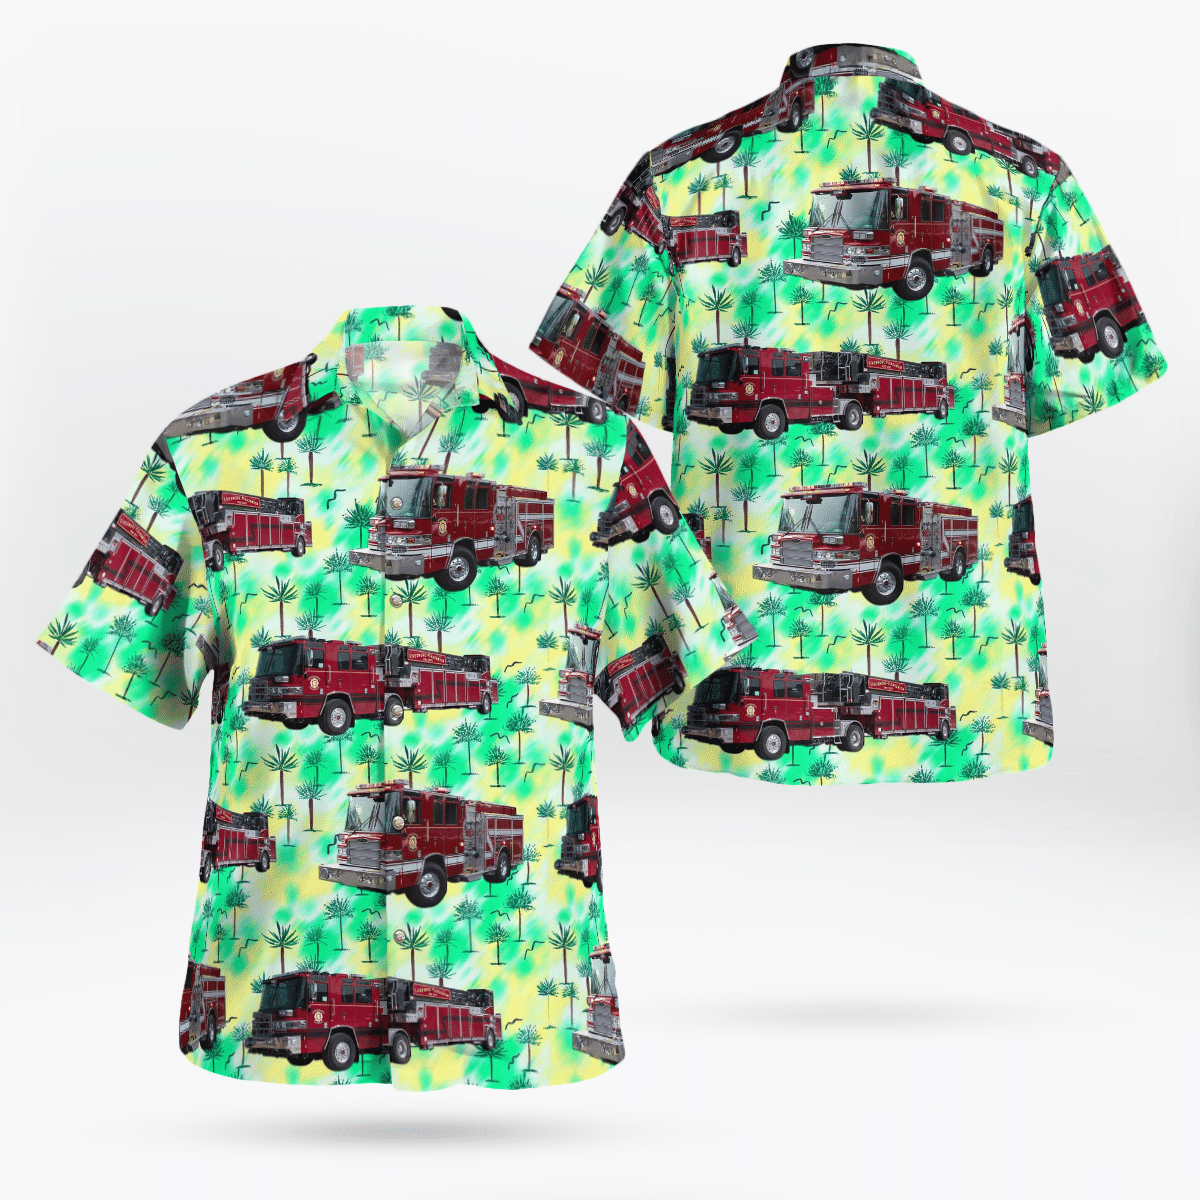 If you are in need of a new summertime look, pick up this Hawaiian shirt 139